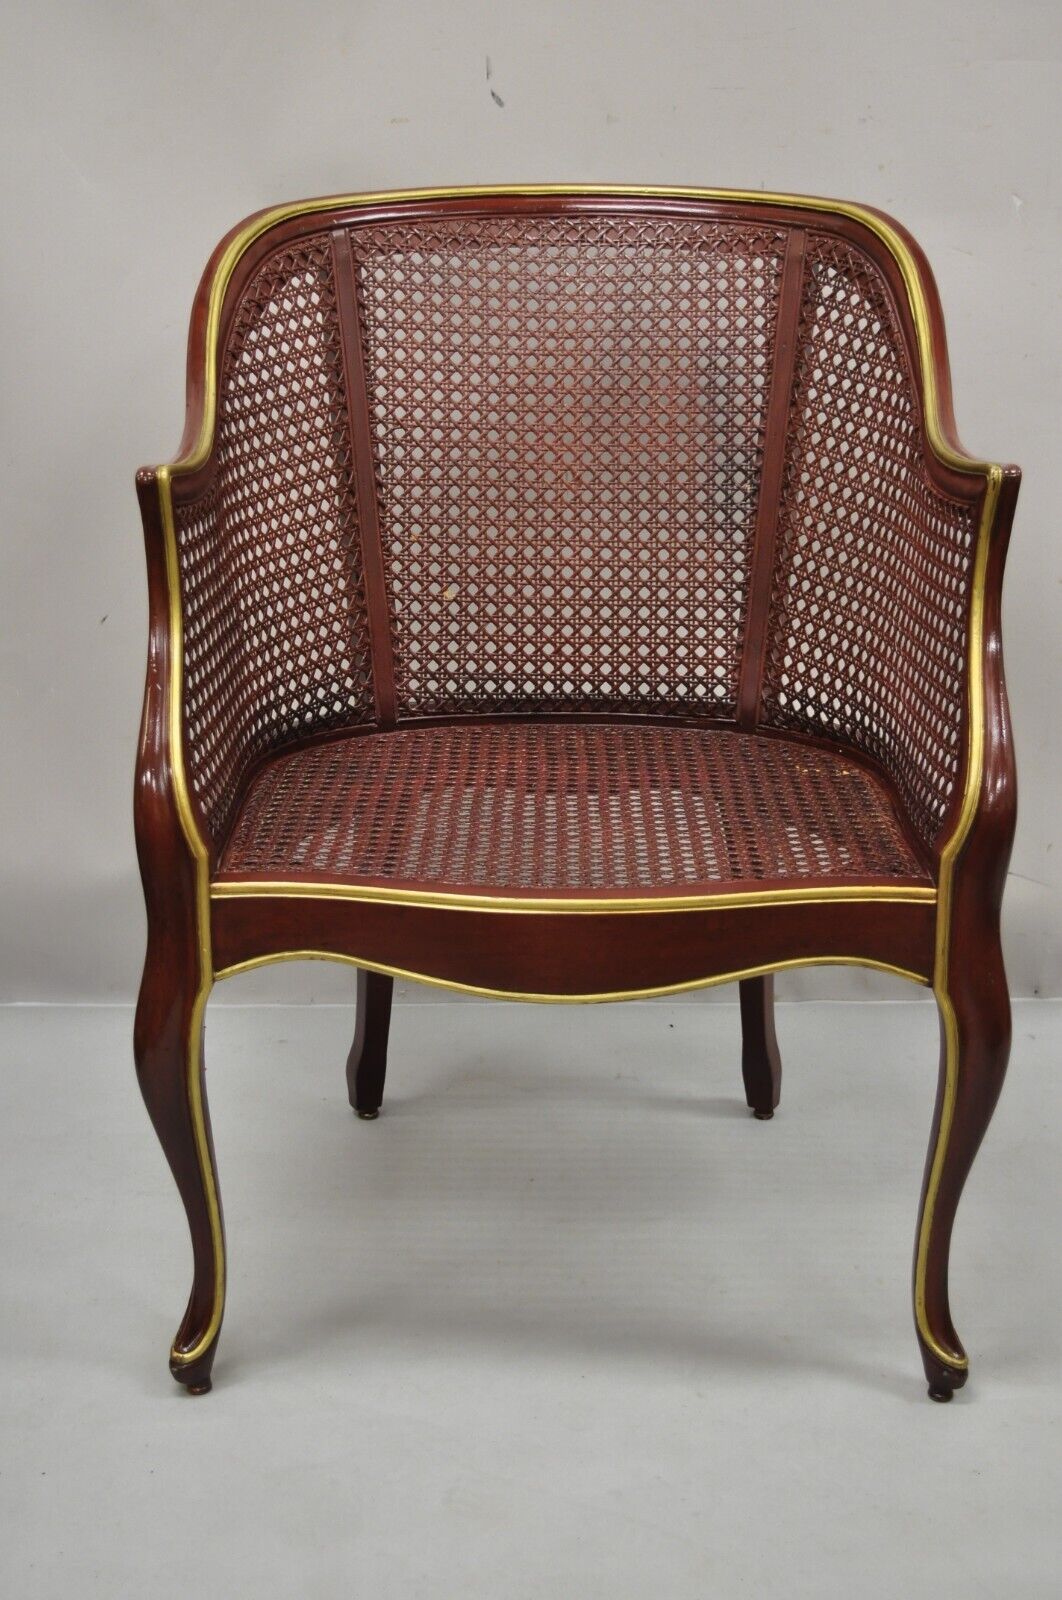 Vintage French Louis XV Style Red Lacquer Cane Bergere Lounge Chair